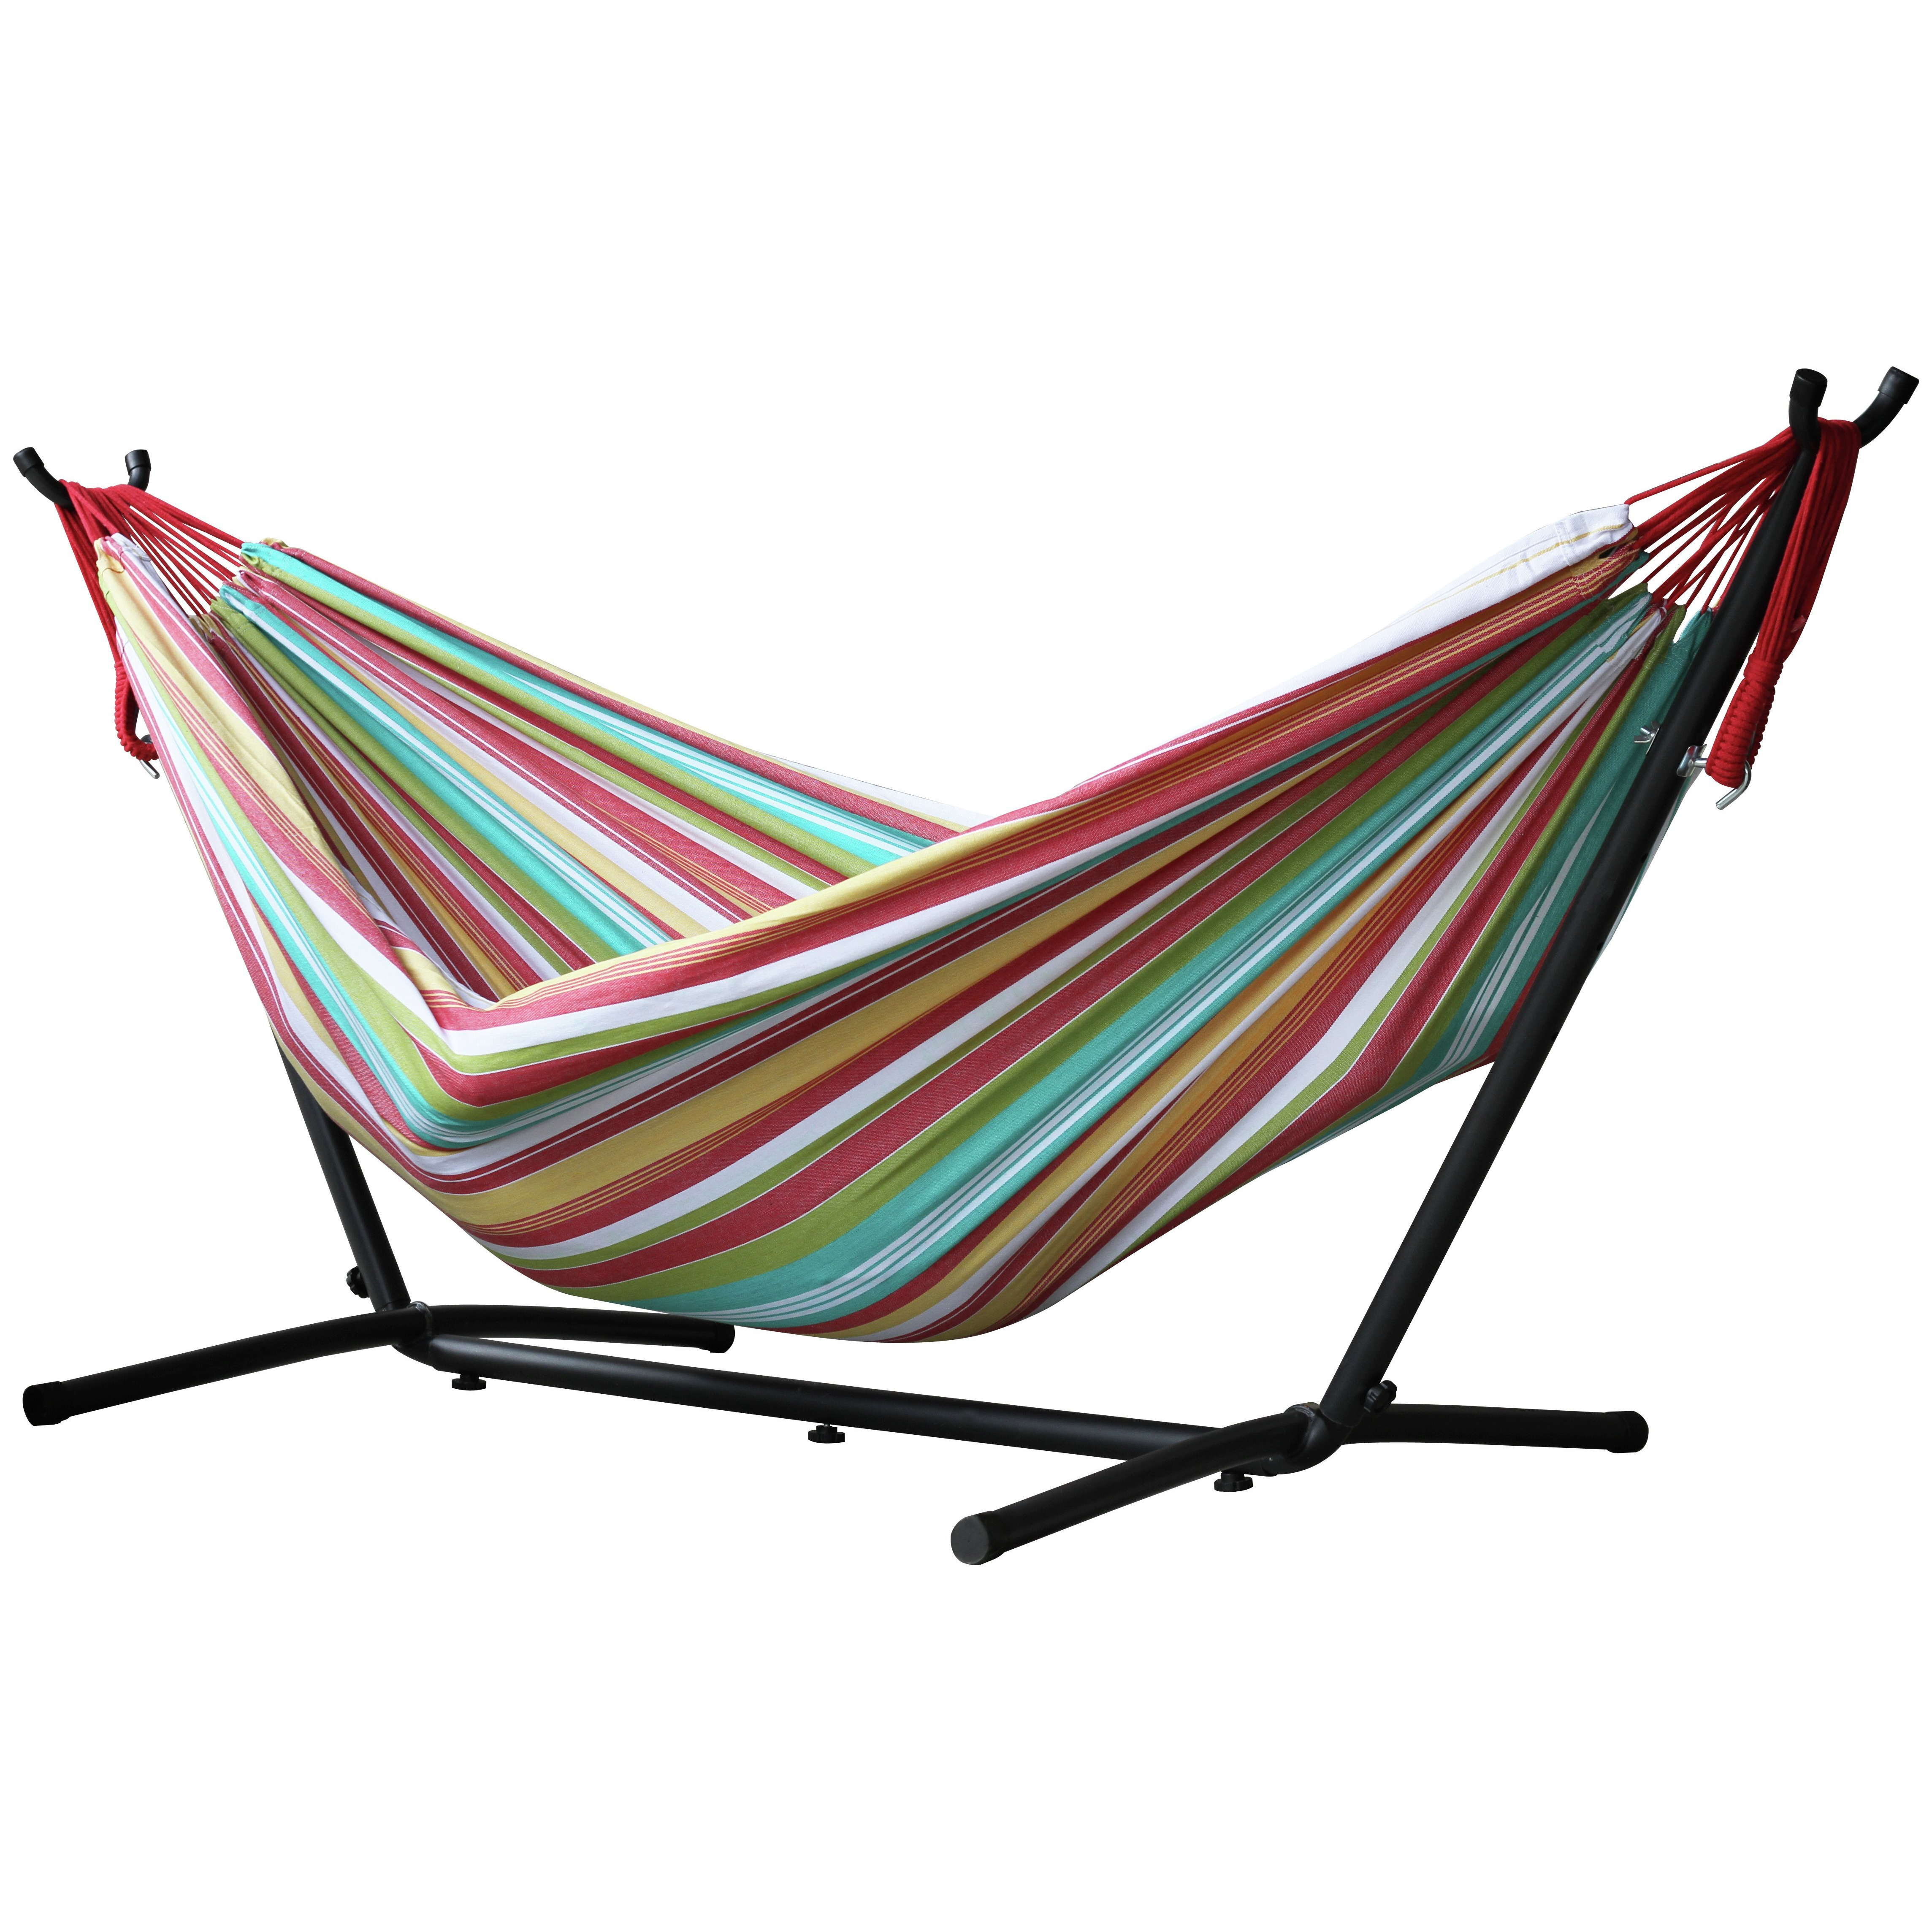 Vivere Salsa Double Hammock with Metal Stand - image 1